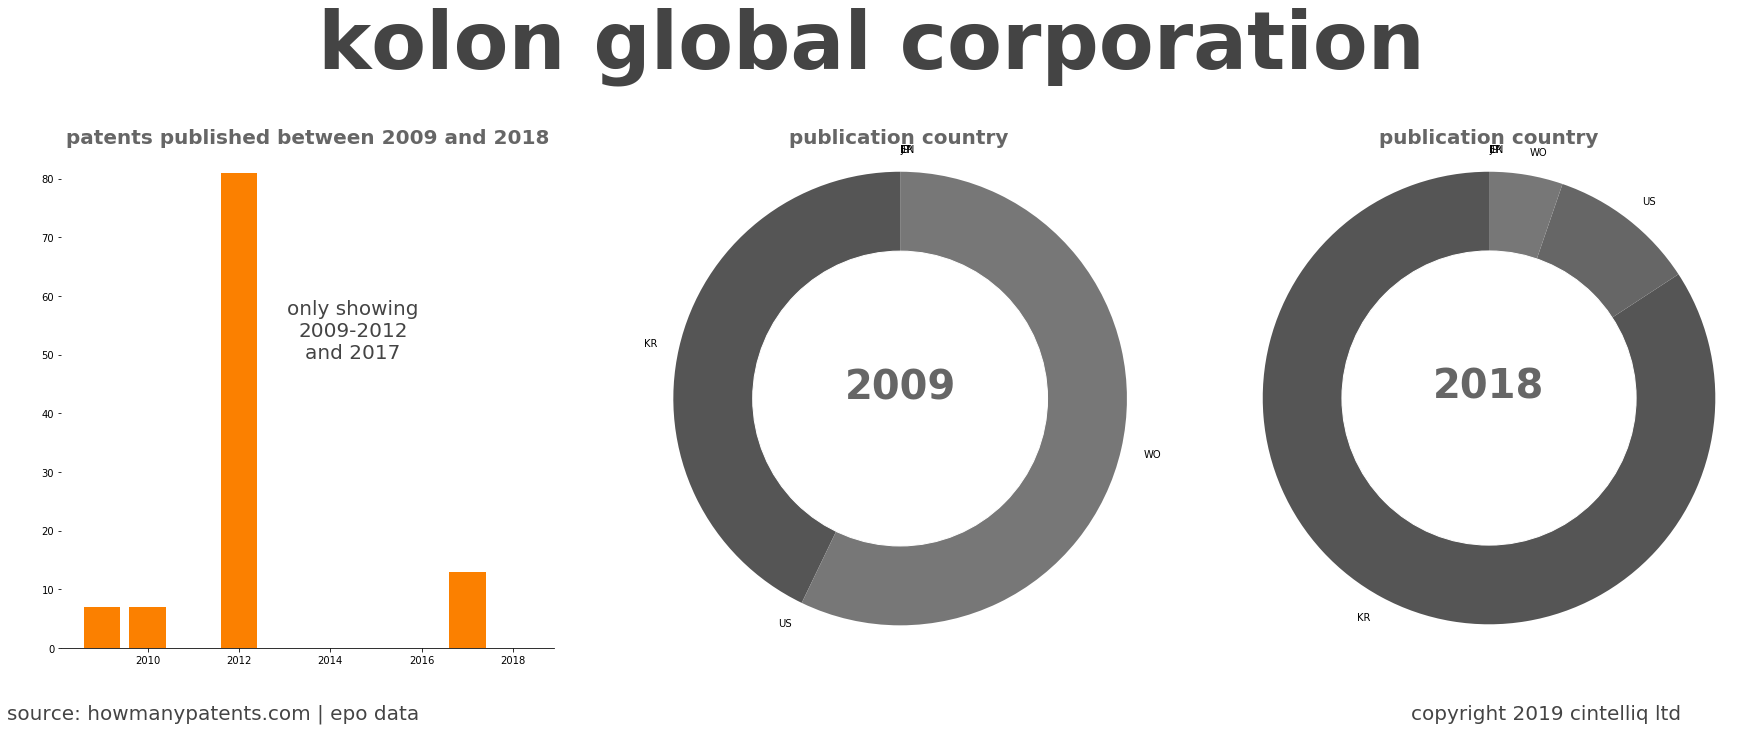 summary of patents for Kolon Global Corporation